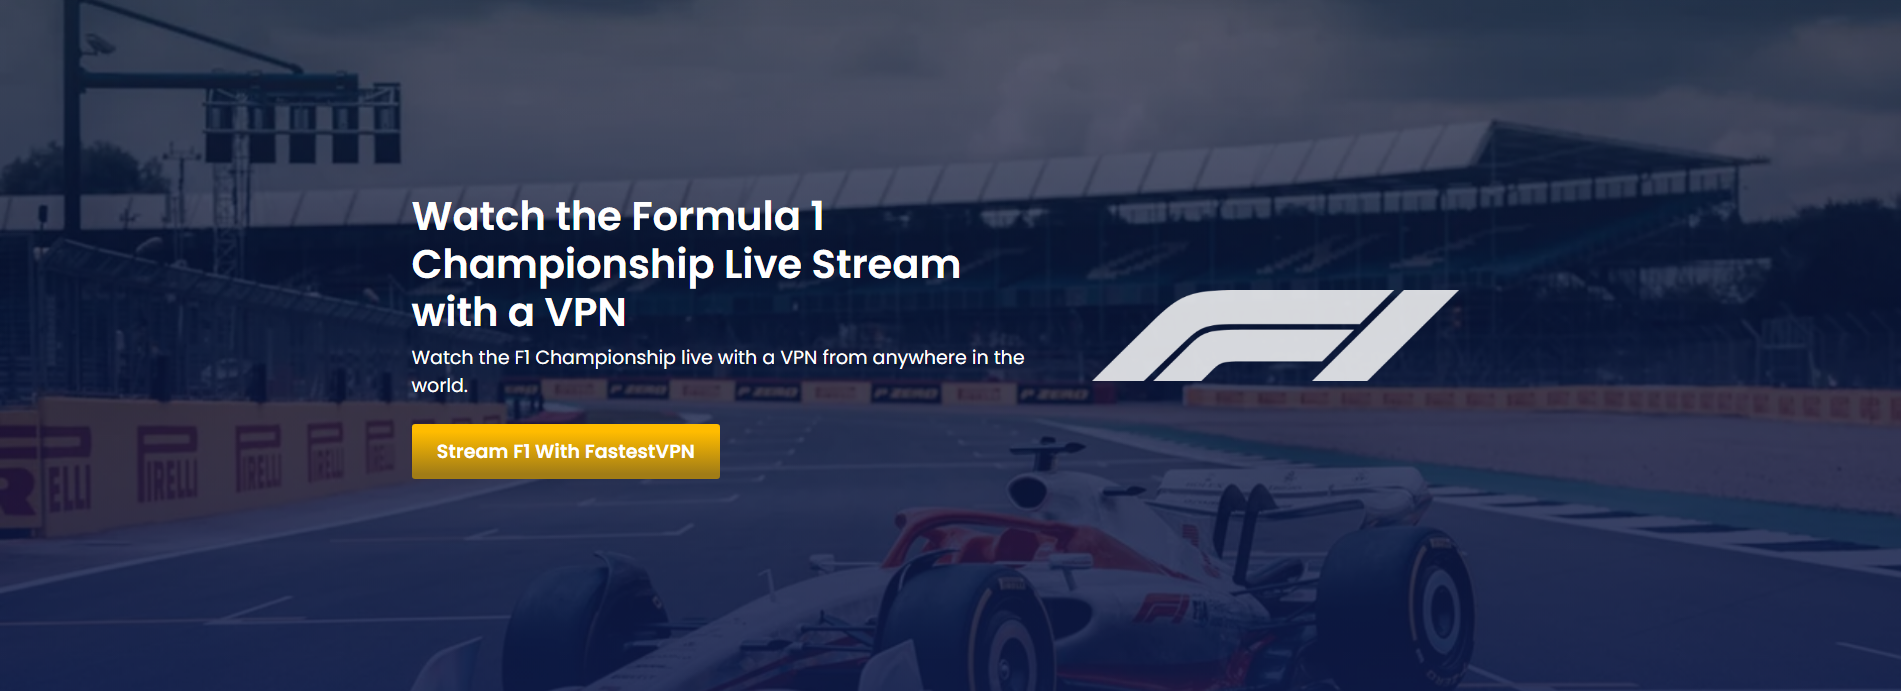 Stream F1 GP Live Online Securely in Any Country with FastestVPN